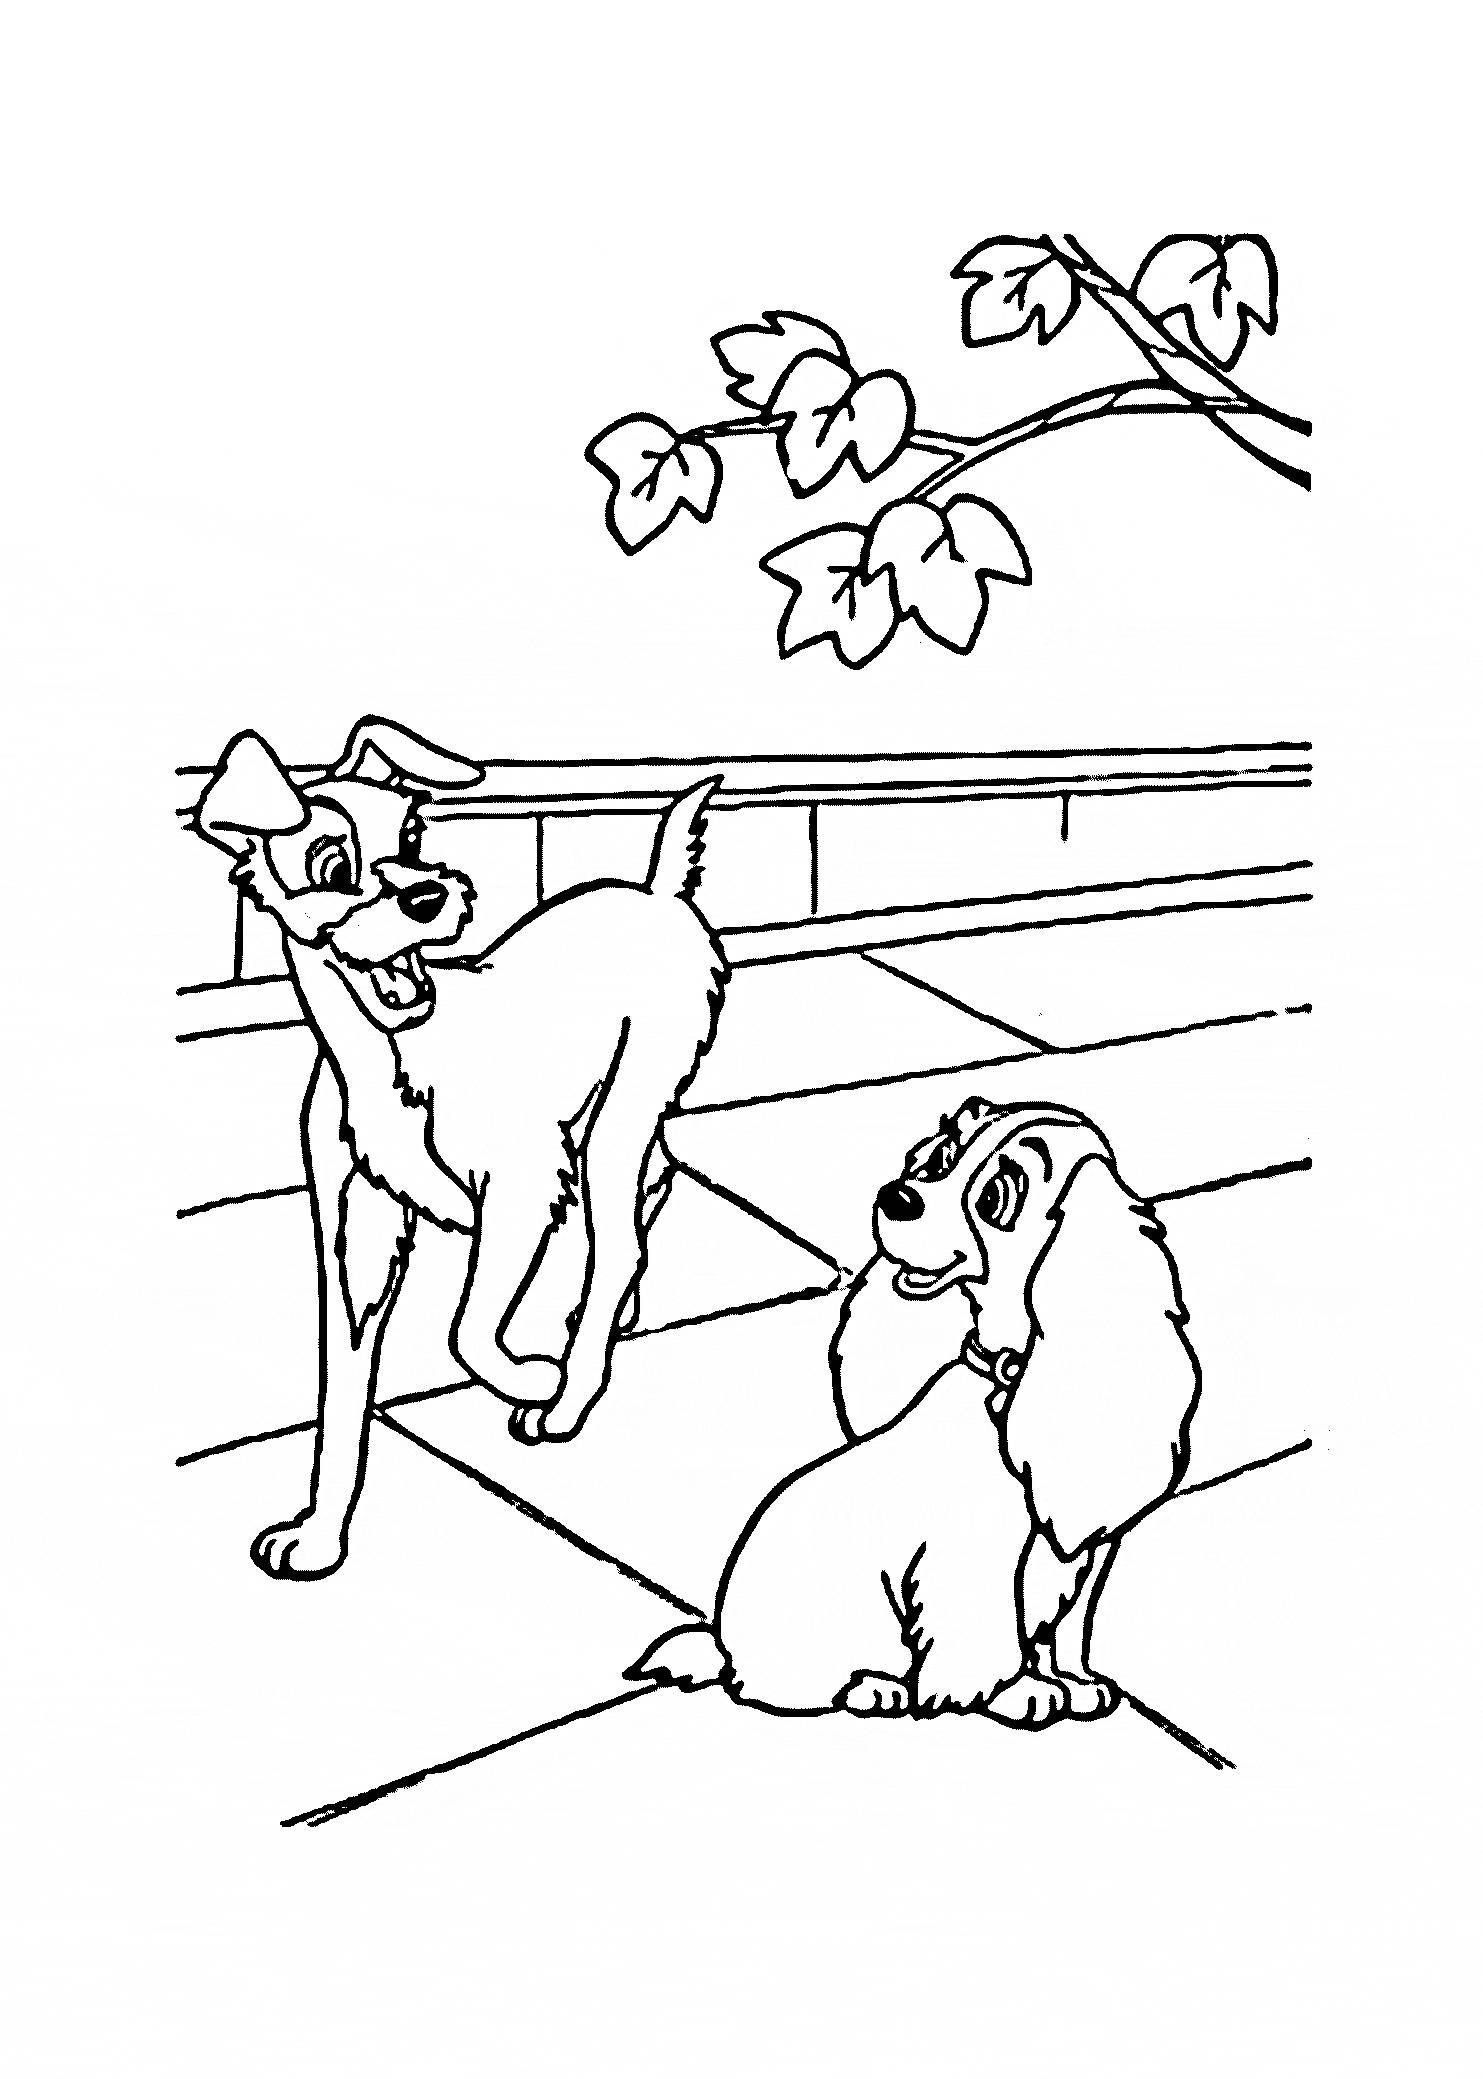 Lady and the Tramp coloring page